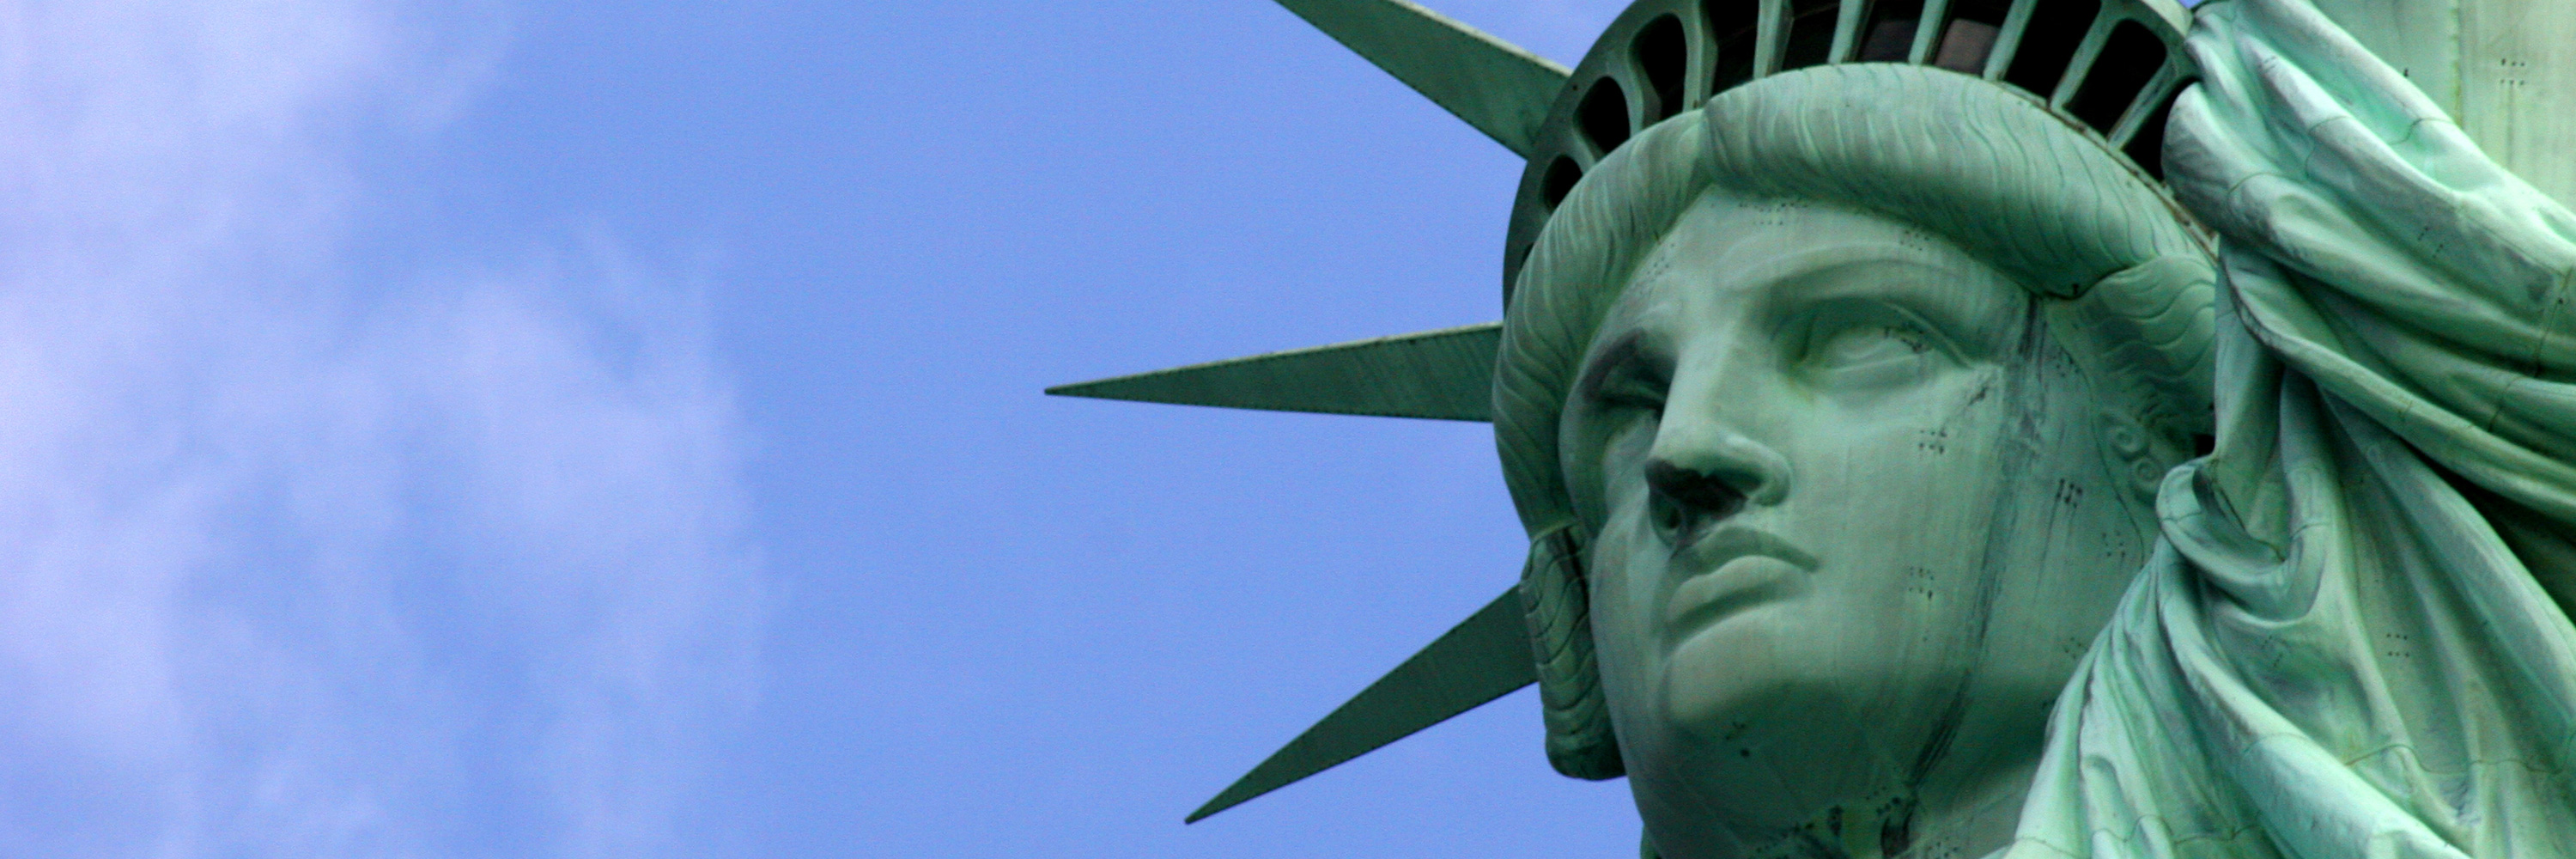 Statue of Liberty Cruise Tickets | Statue of Liberty Discount